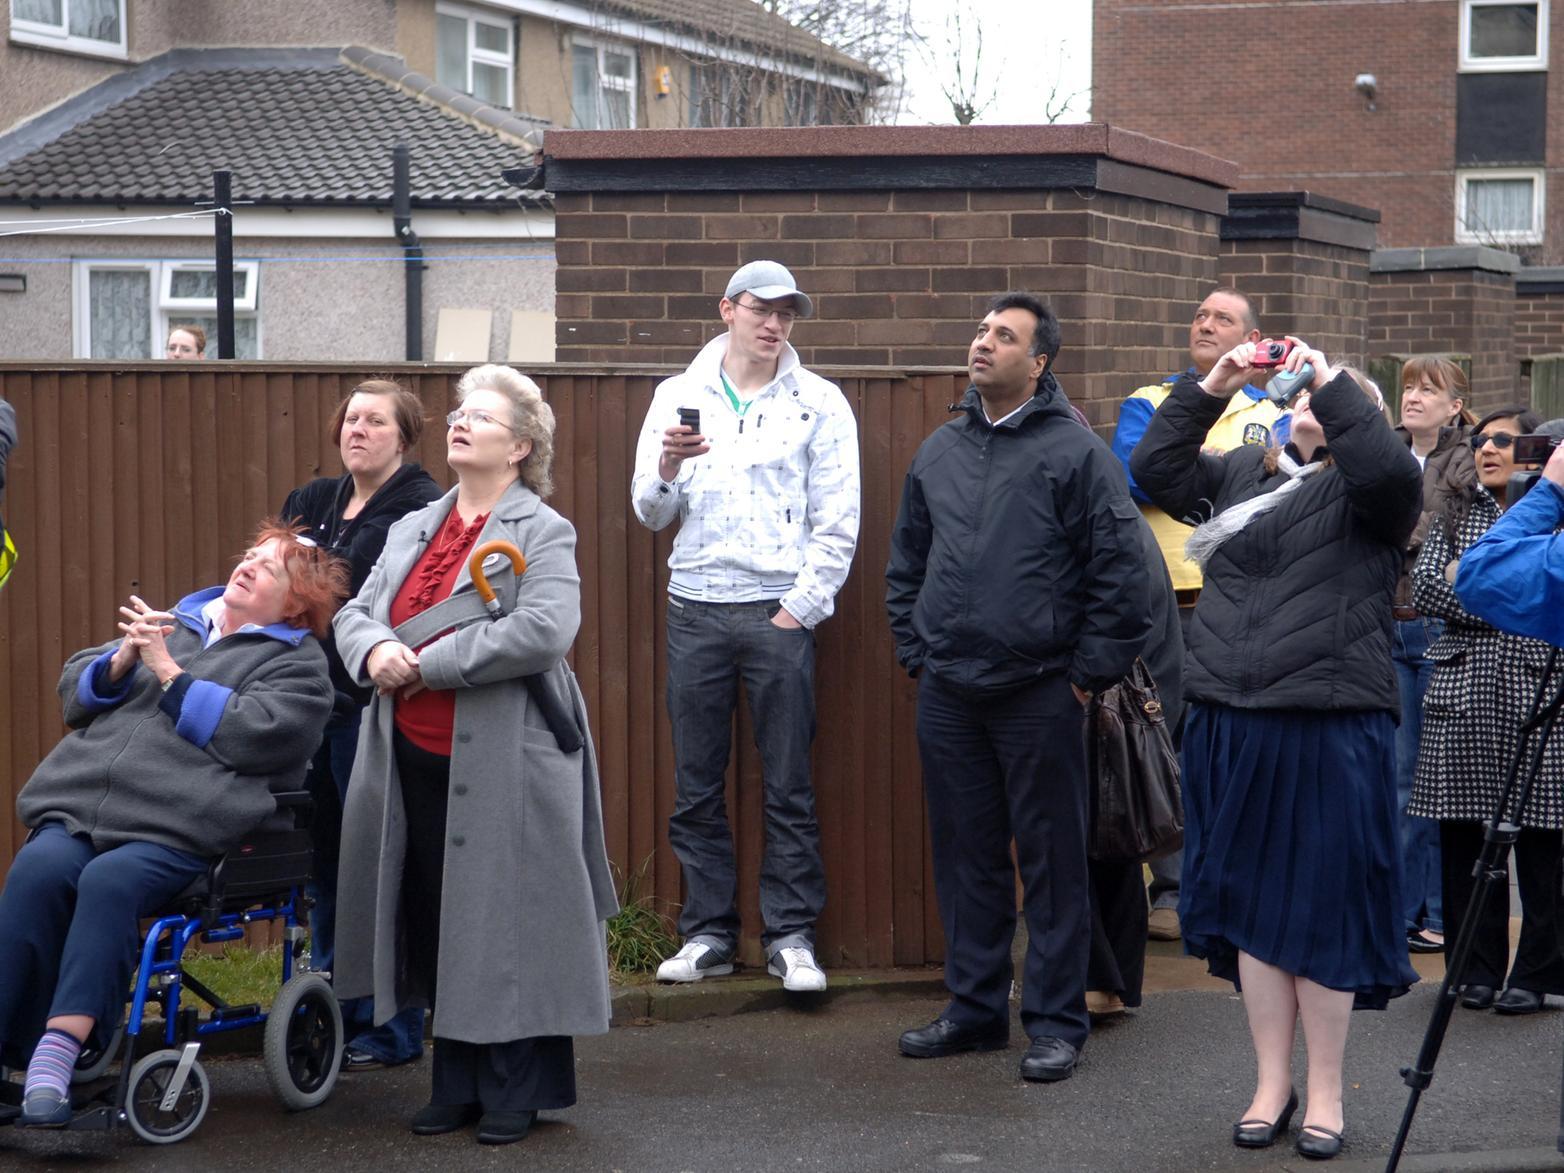 Residents watched as the five tower blocks were demolished in March 2010.